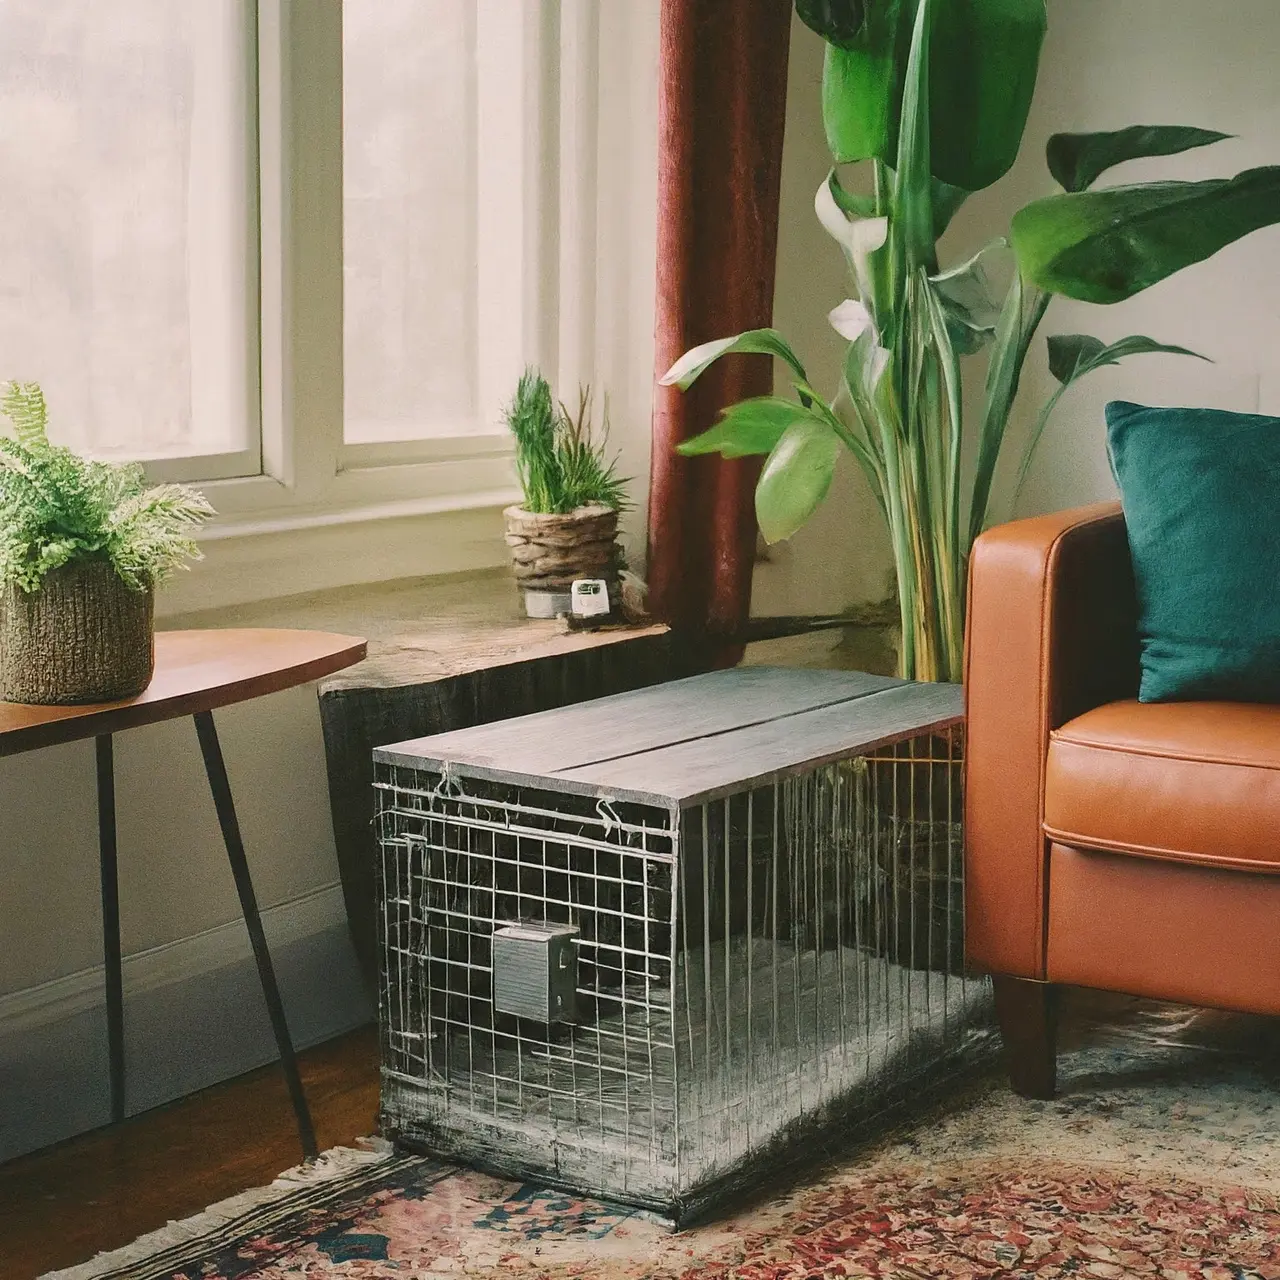 A medium-sized dog crate in a cozy living room. 35mm stock photo